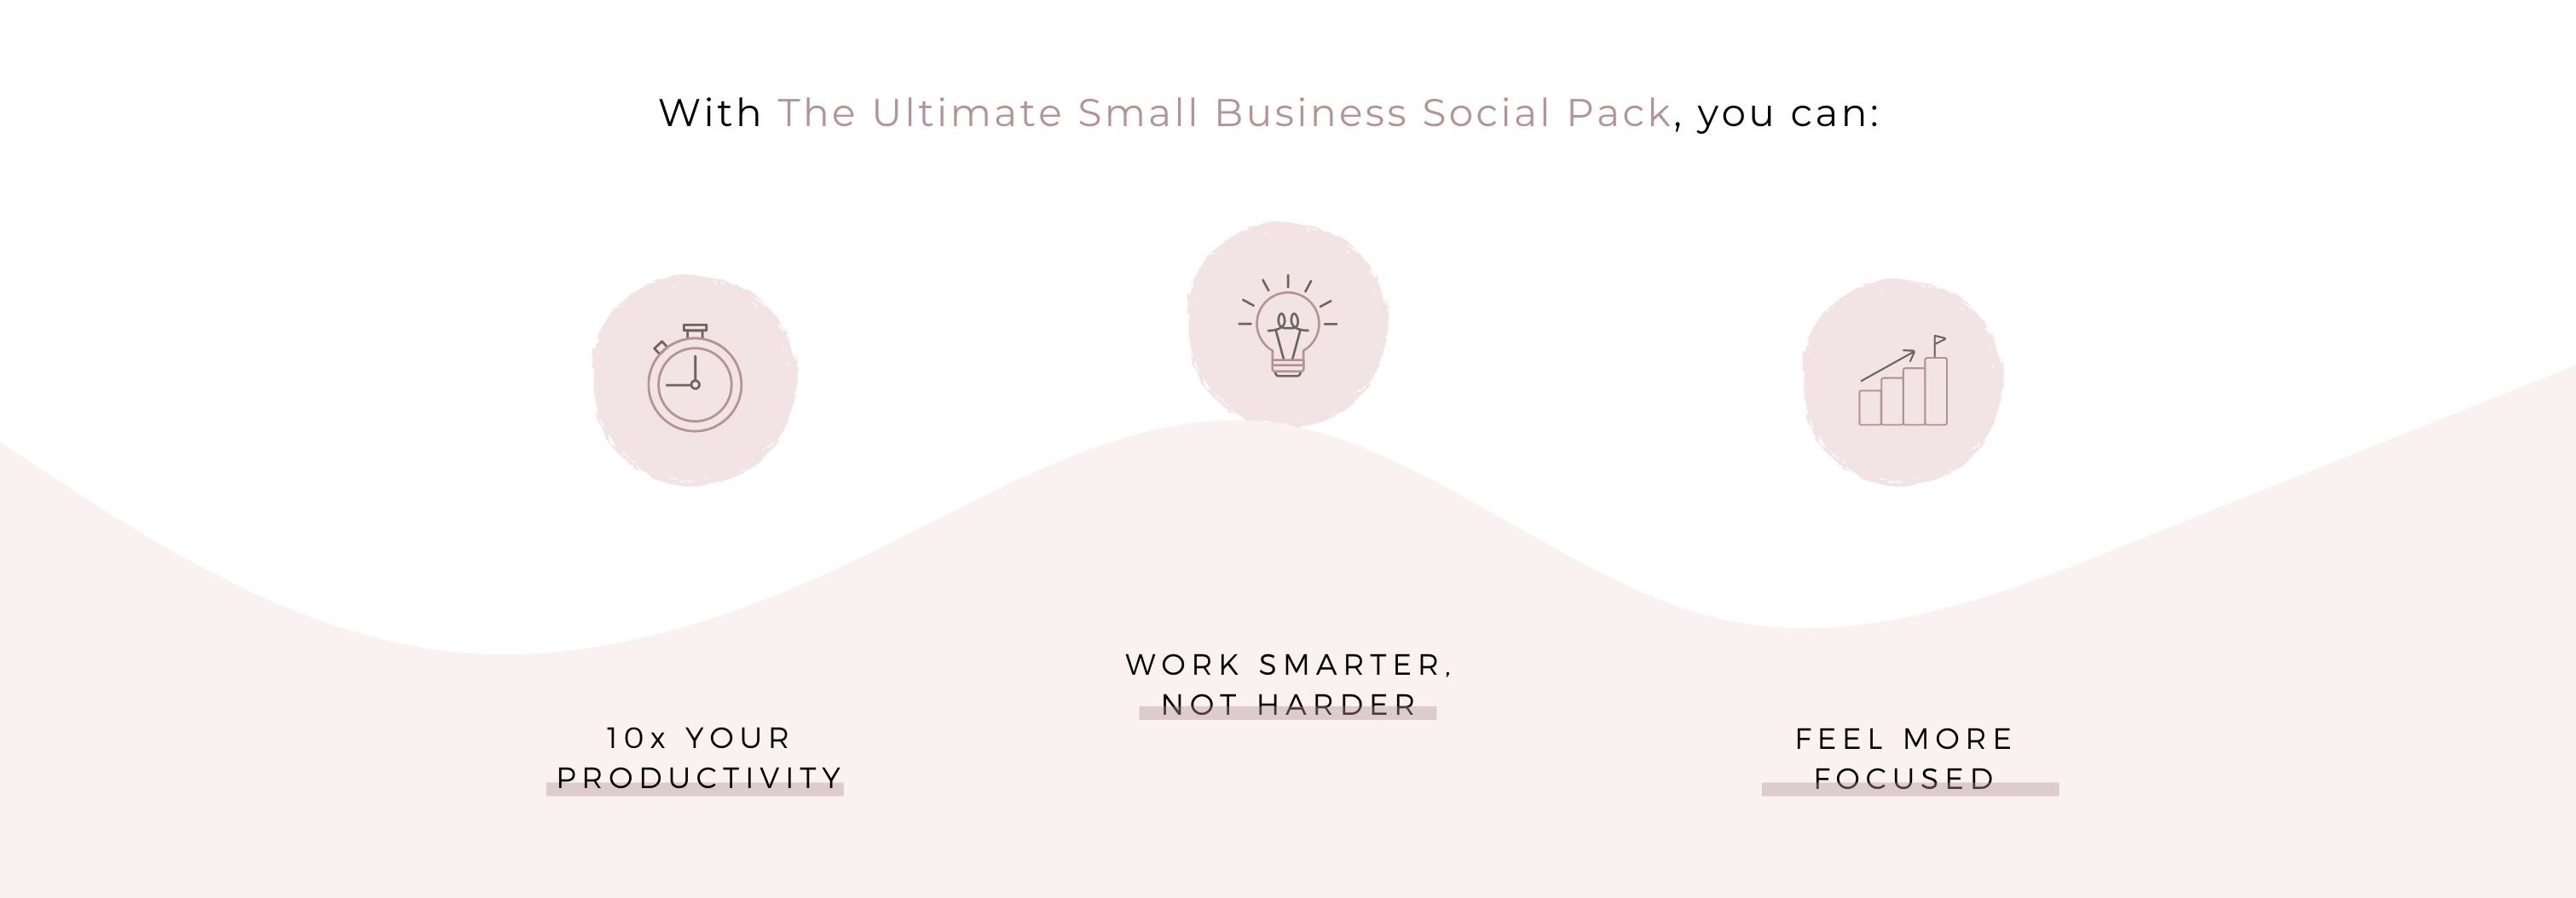 The-Ultimate-Small-Business-Social-Pack